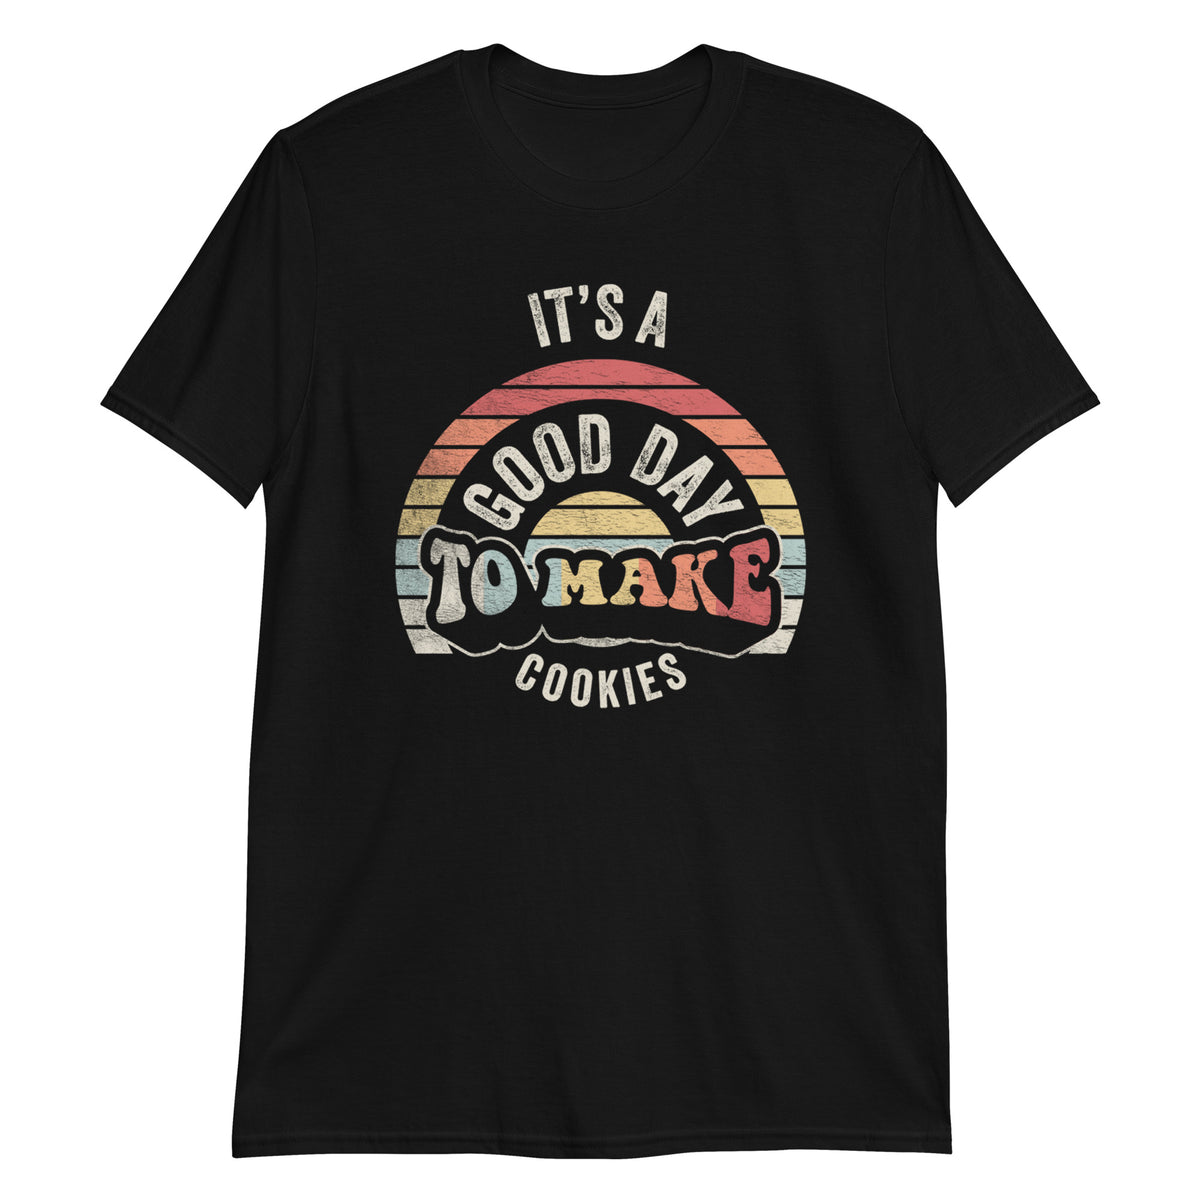 It's a Good Day to Make Cookies T-Shirt